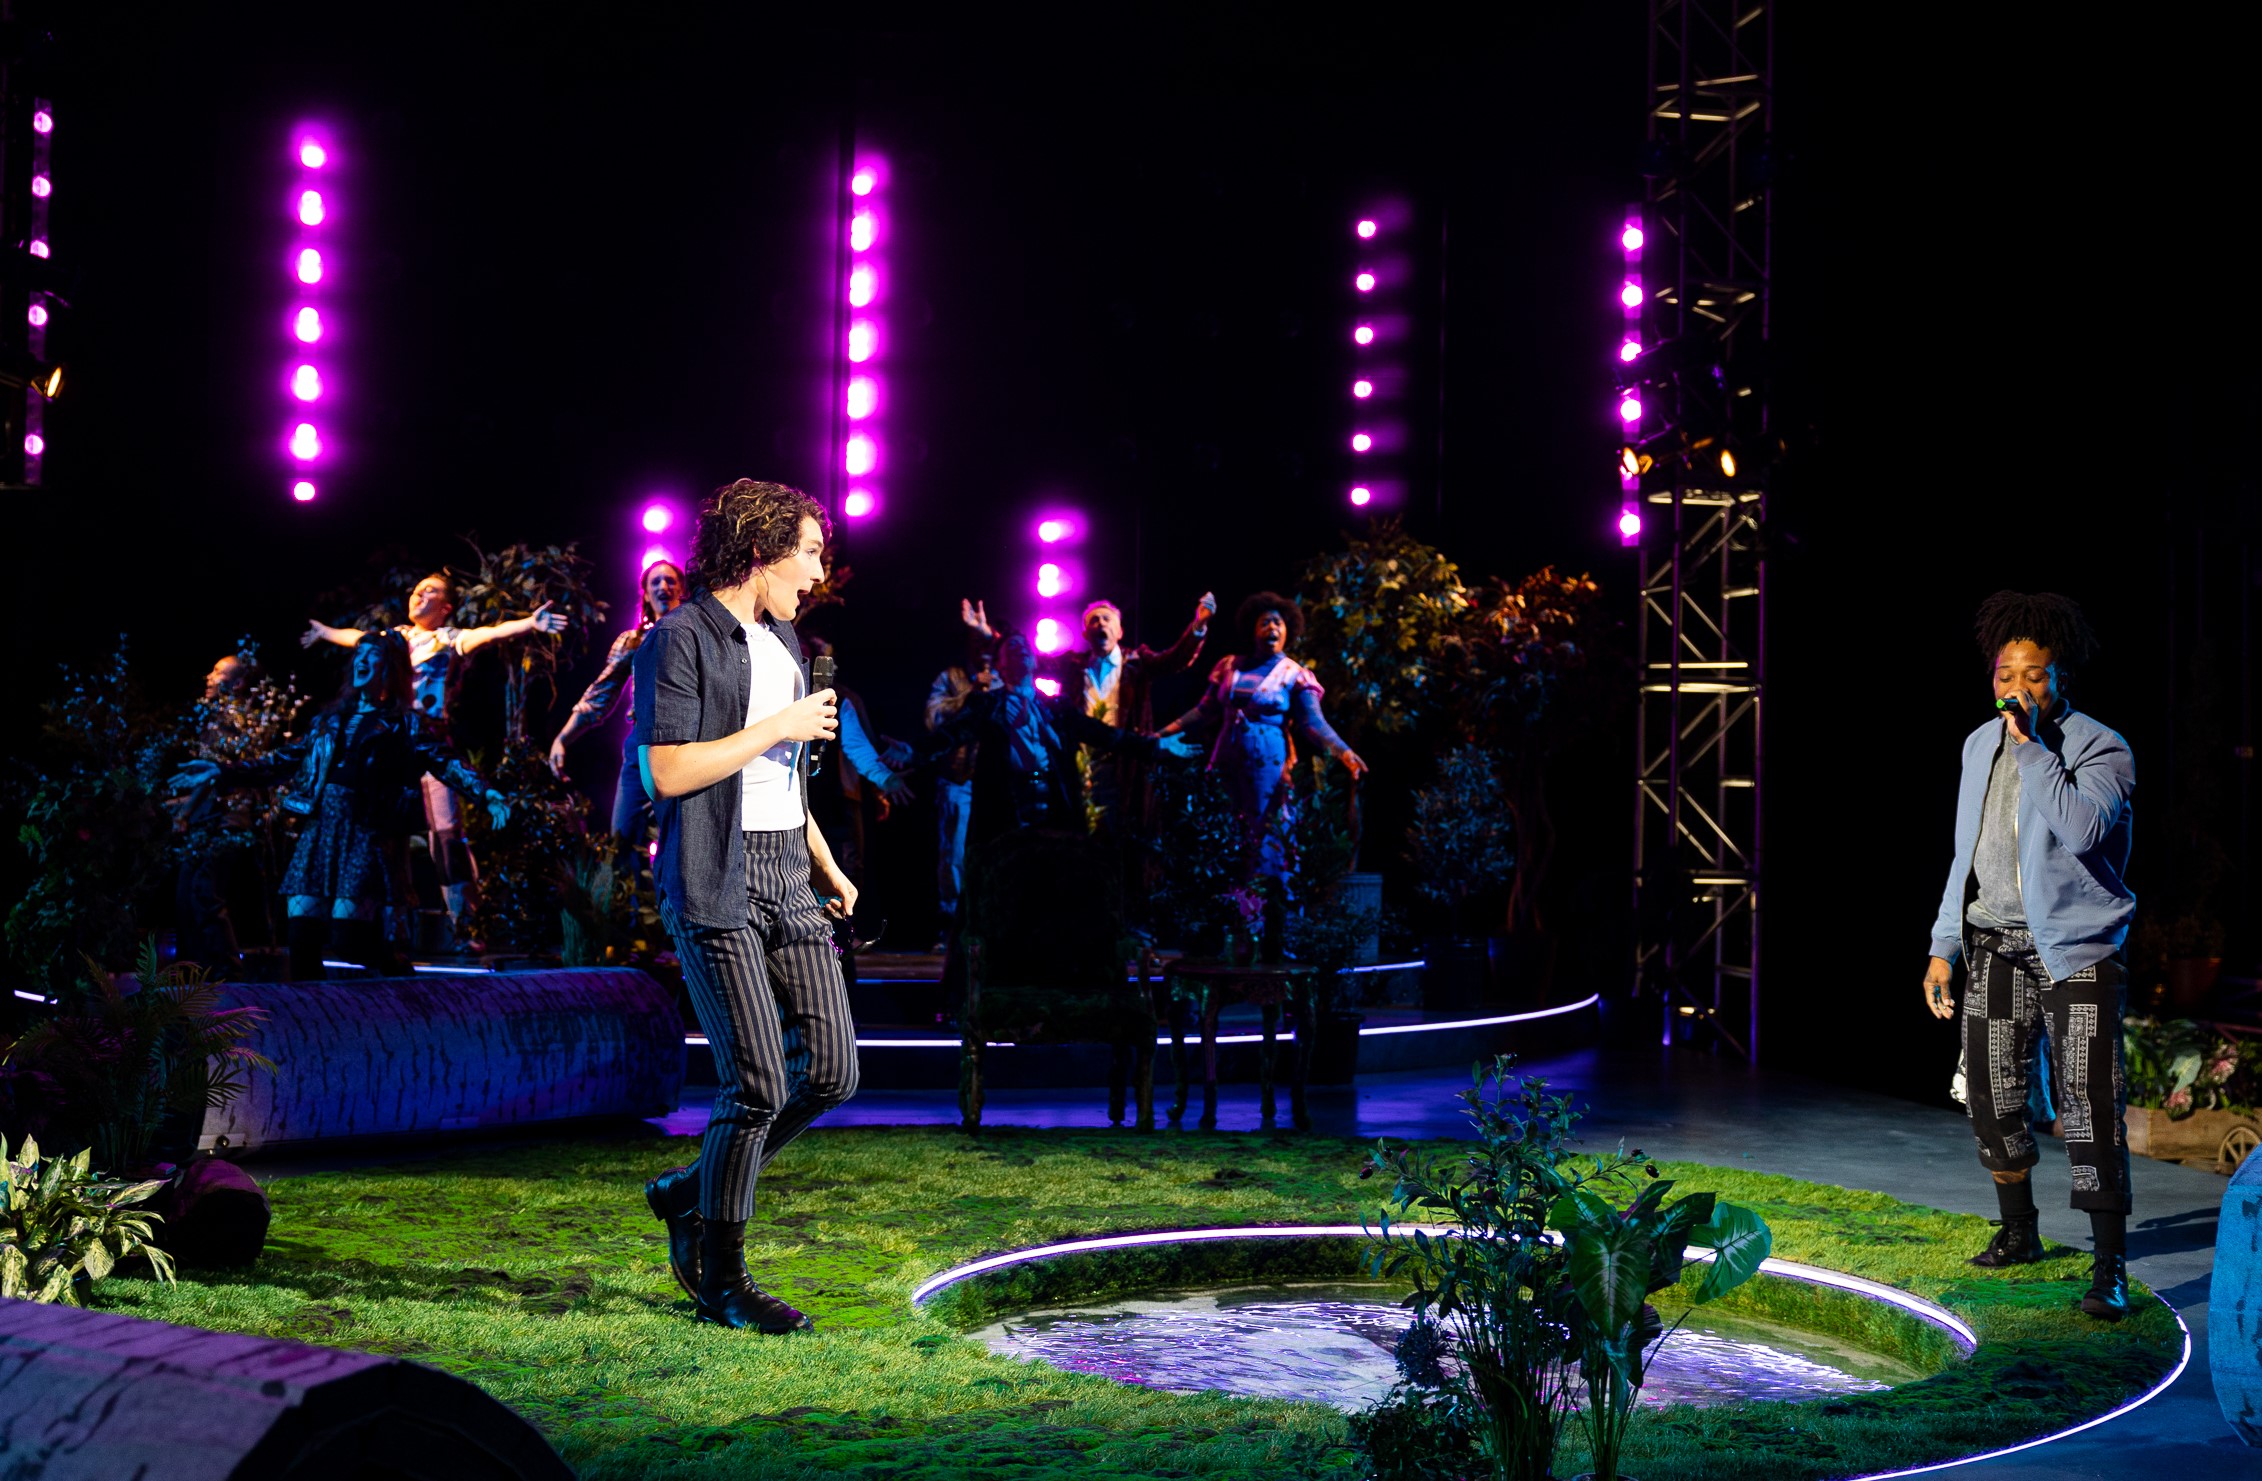 (L-R) Peter Smith as “Rosalind” and Esco Jouléy as “Orlando” with the cast of La Jolla Playhouse’s production of AS YOU LIKE IT, by William Shakespeare, co-directed by Christopher Ashley and Will Davis, running through December 11, produced in association with Diversionary Theatre; photo by Rich Soublet II.